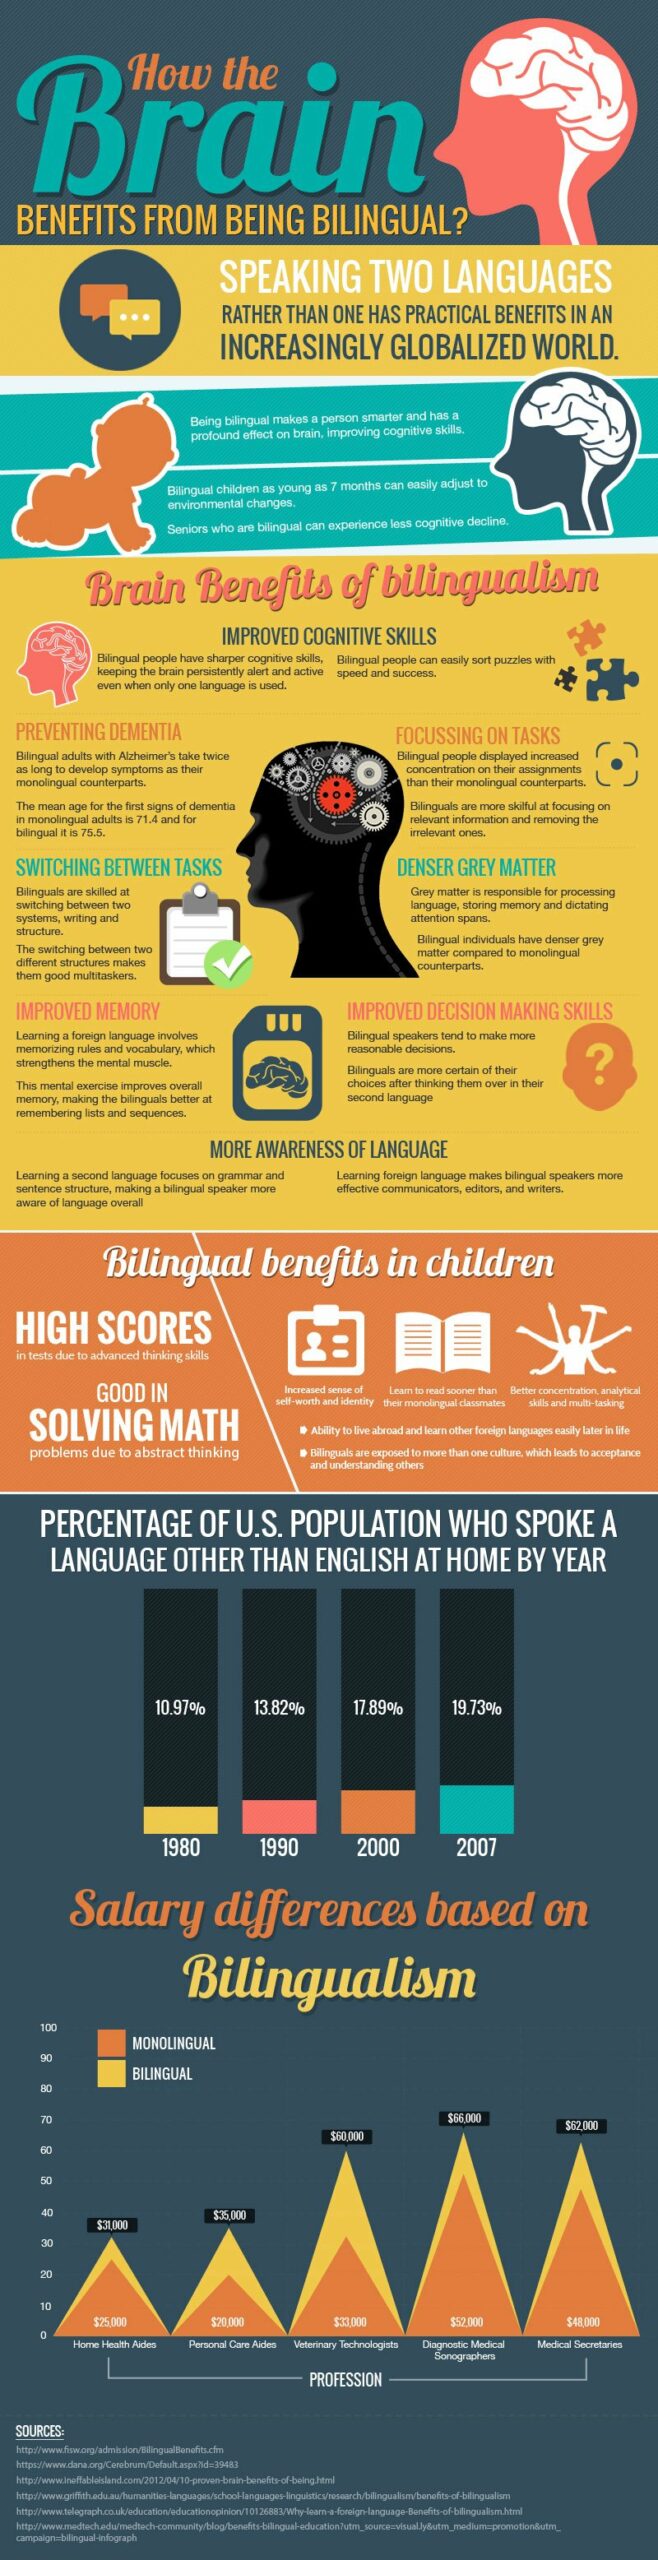 How the brain benefits from being bilingual (infographic)